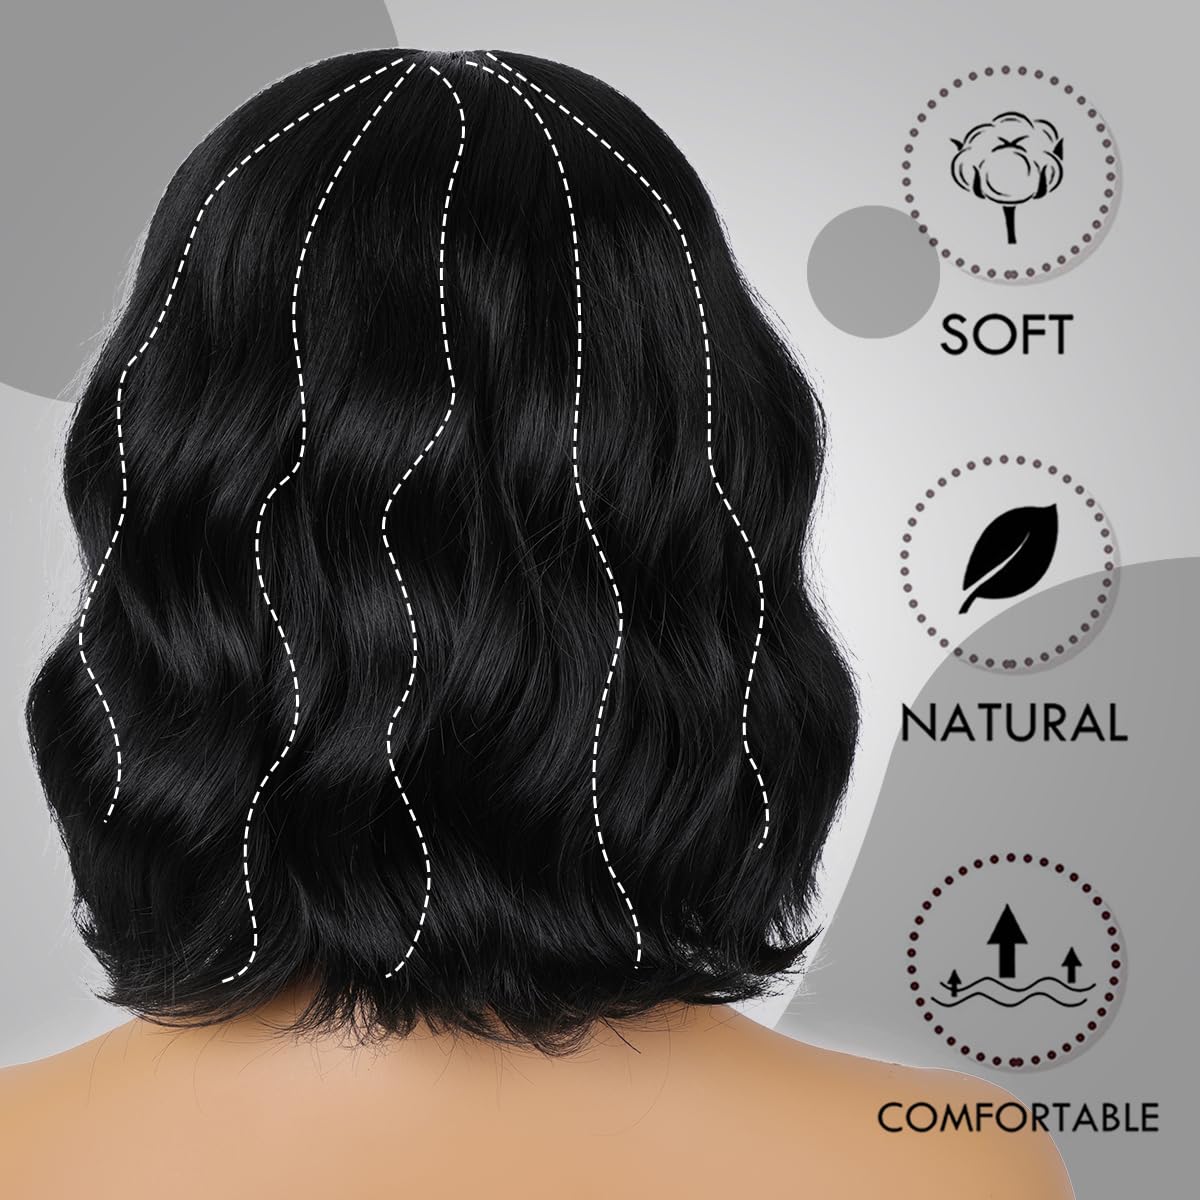 Short Wavy Black Wig with Bangs Bob Short Charming Curly Wavy Wig Women Synthetic Natural Looking Heat Resistant Fiber Hair for Women (14inch)